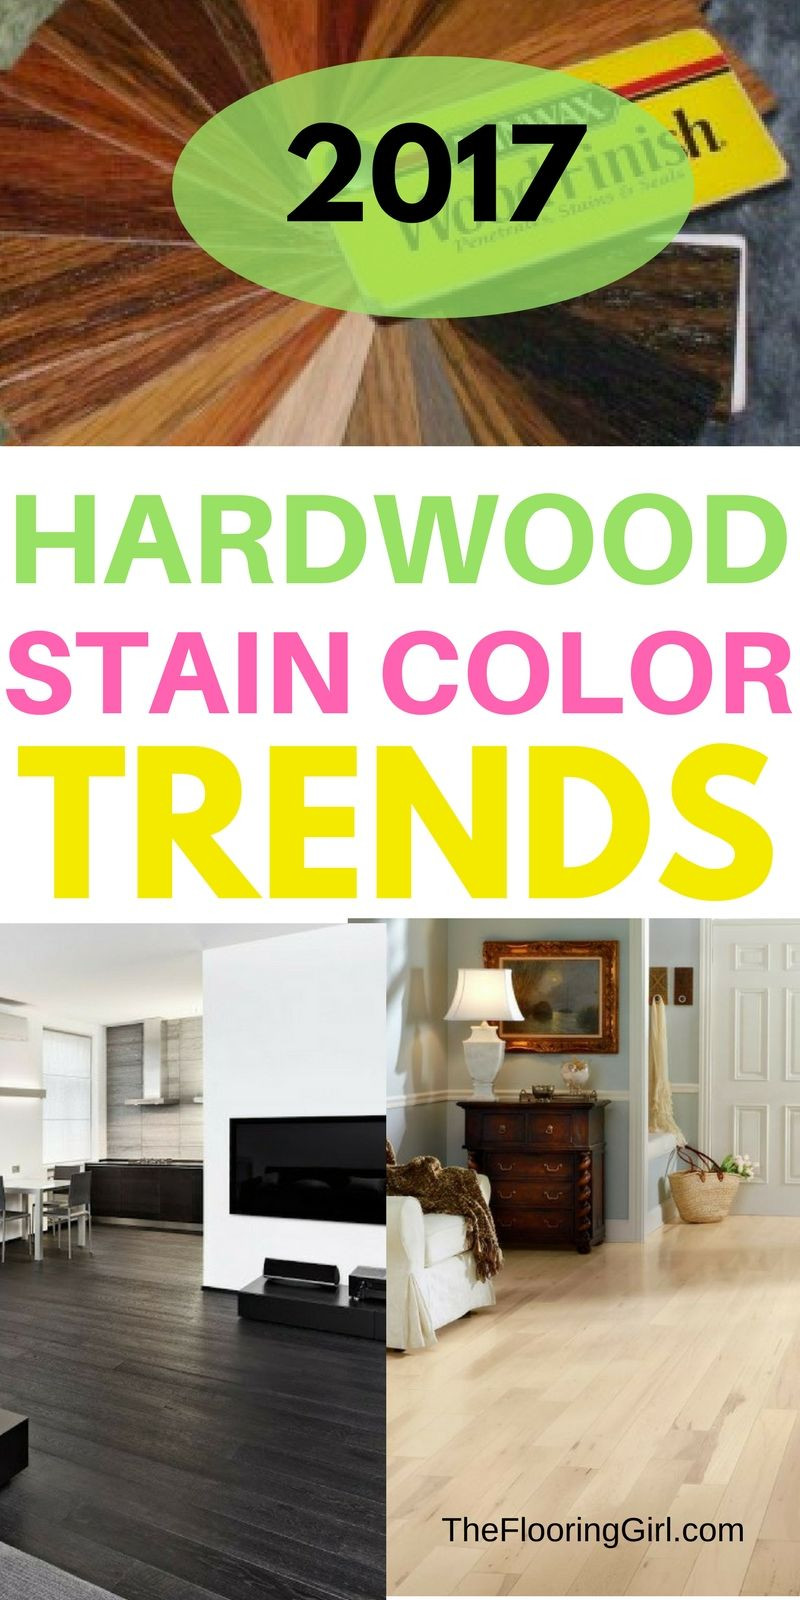 discount hardwood flooring colorado springs of hardwood flooring stain color trends 2018 more from the flooring inside hardwood flooring stain color trends for 2017 hardwood colors that are in style theflooringgirl com